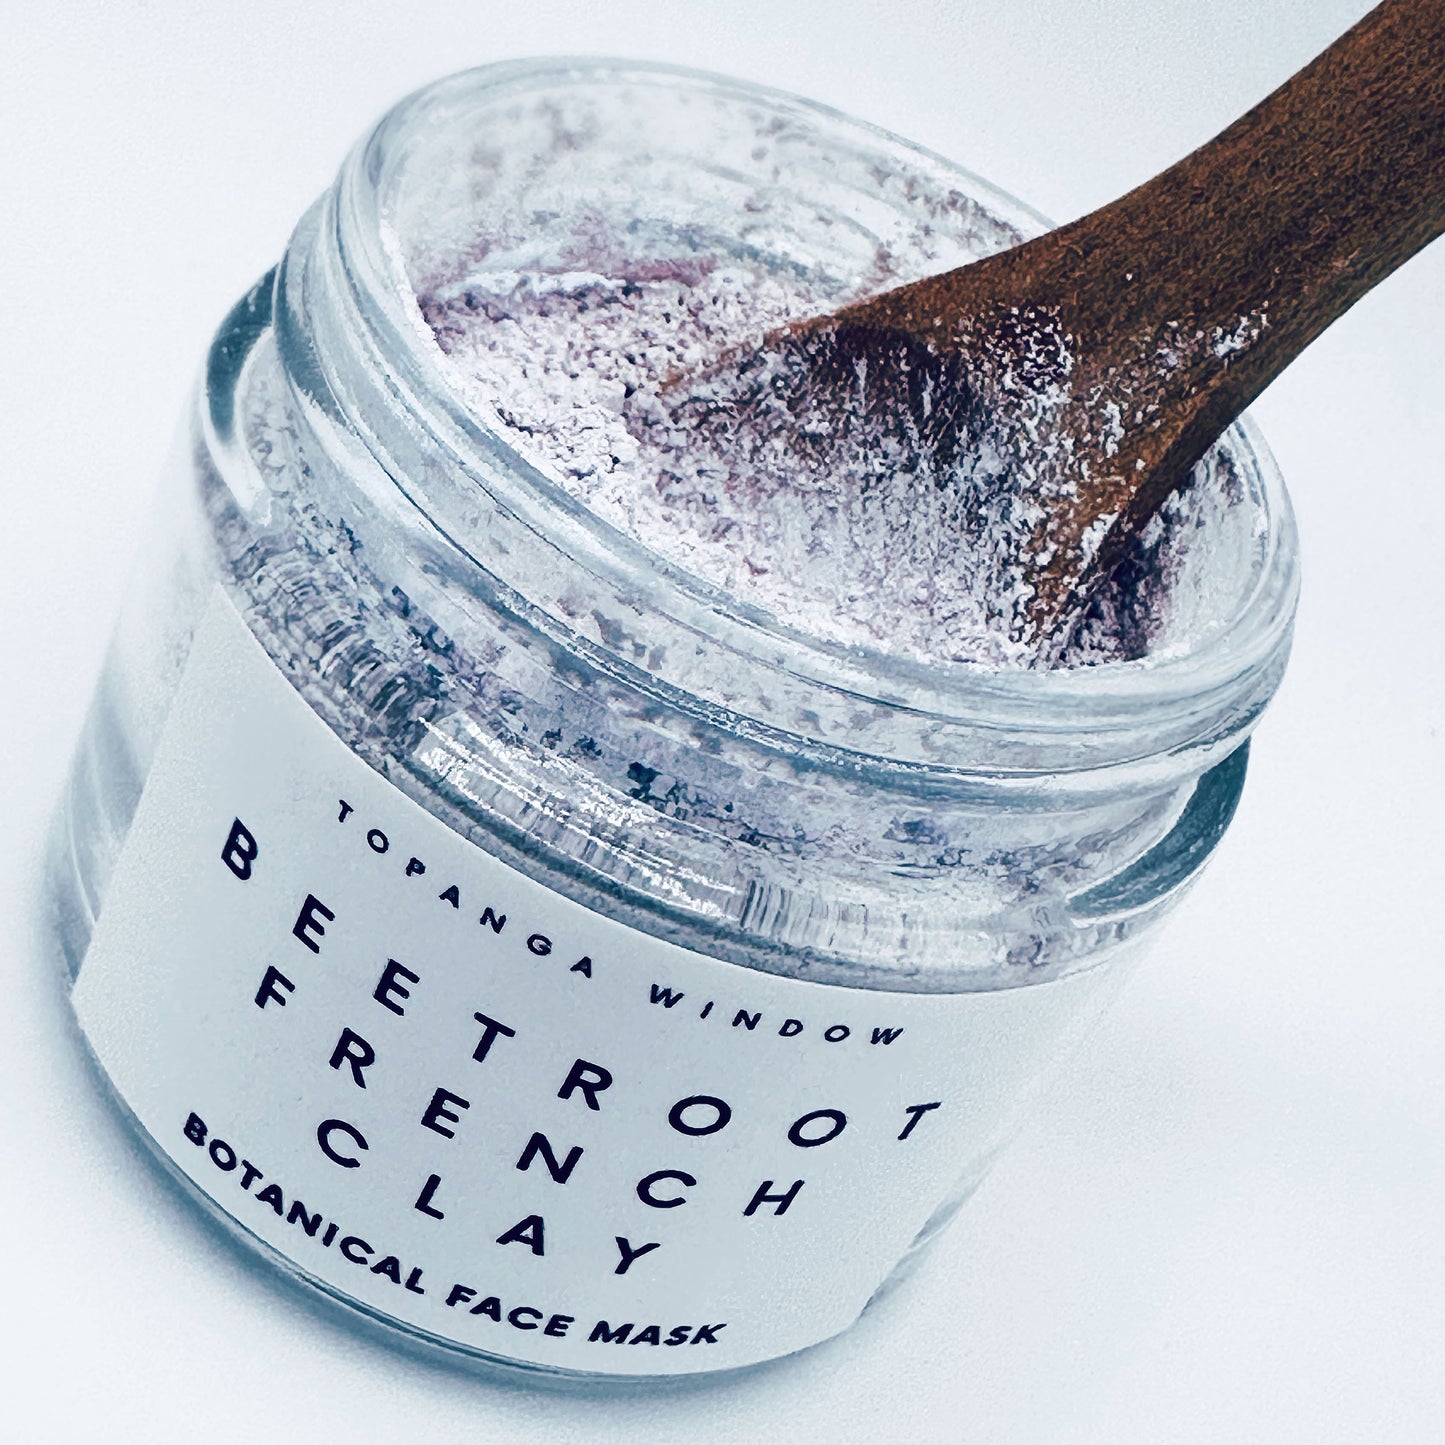 BEETROOT CLAY MASK